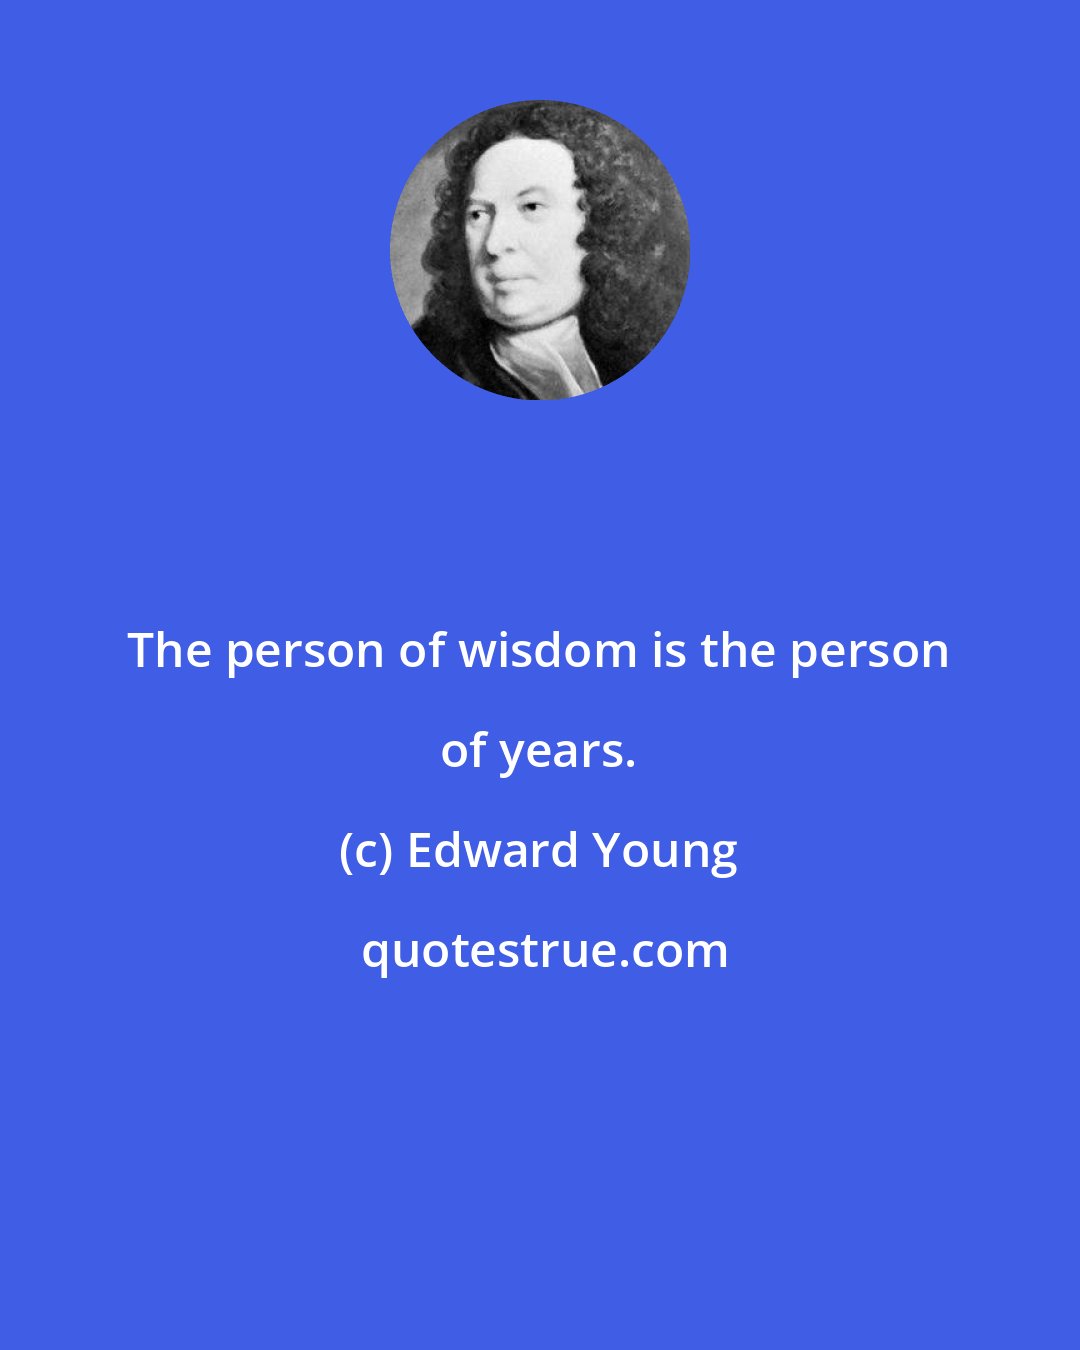 Edward Young: The person of wisdom is the person of years.